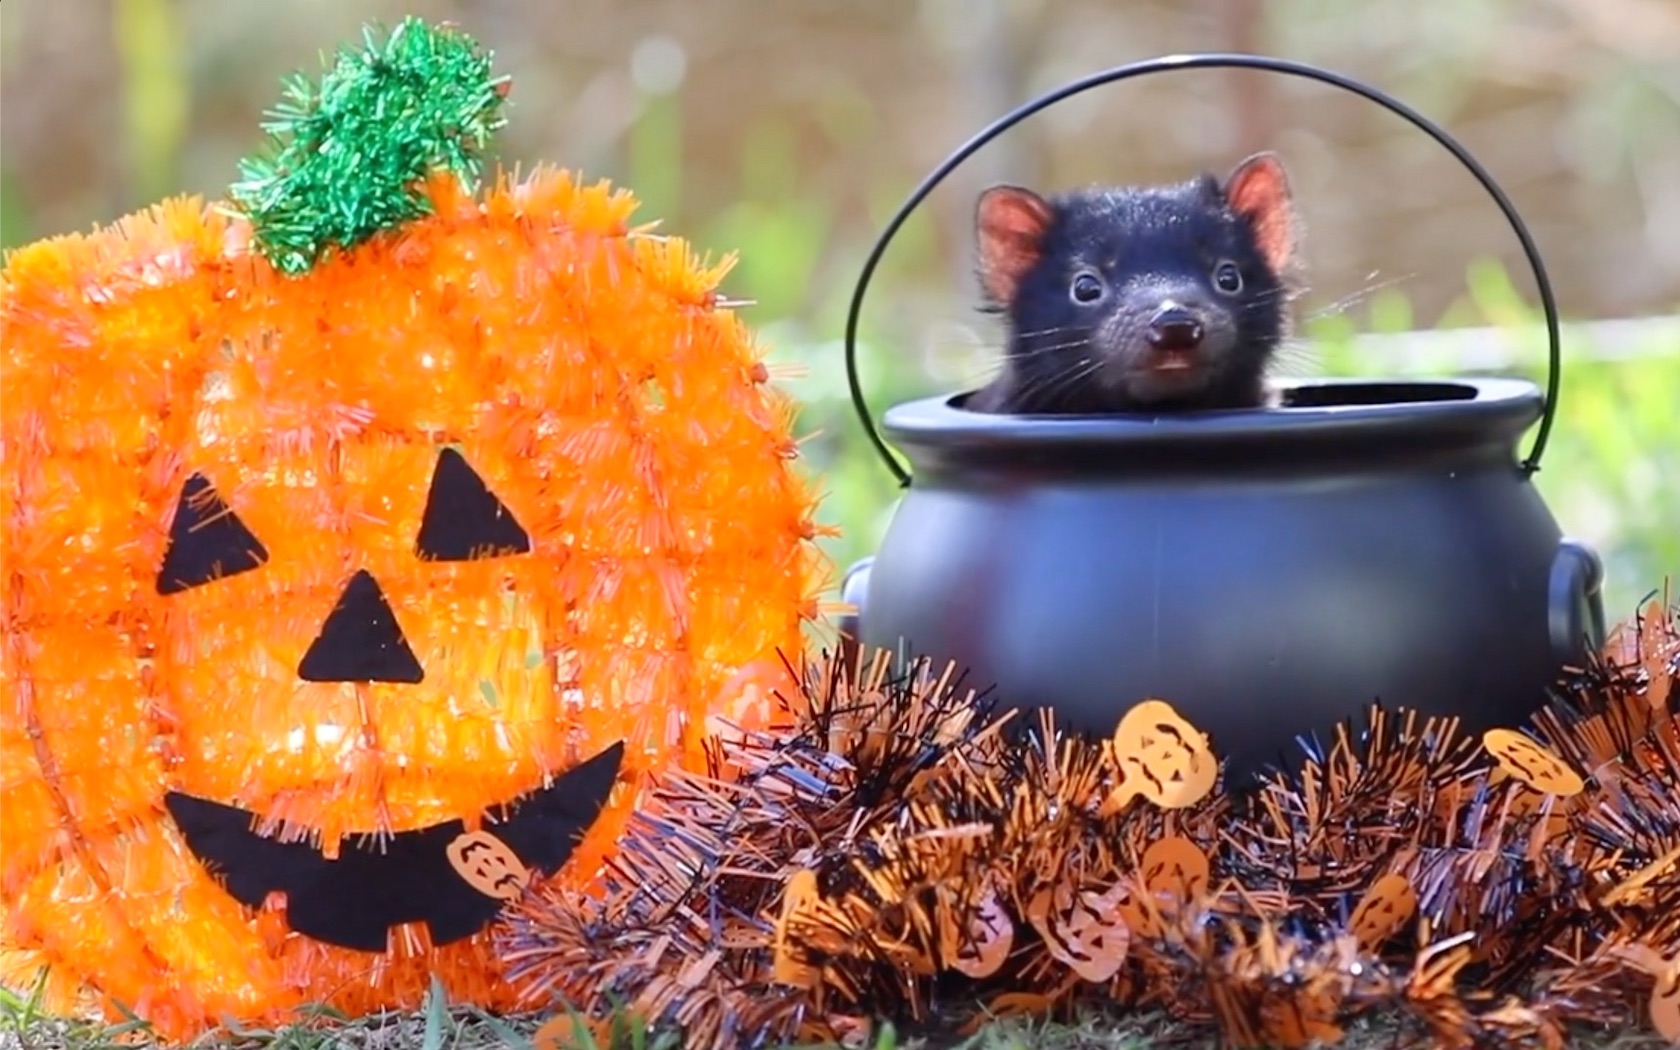 Australian Reptile Park: These Native Animals Are Spookily Into Halloween